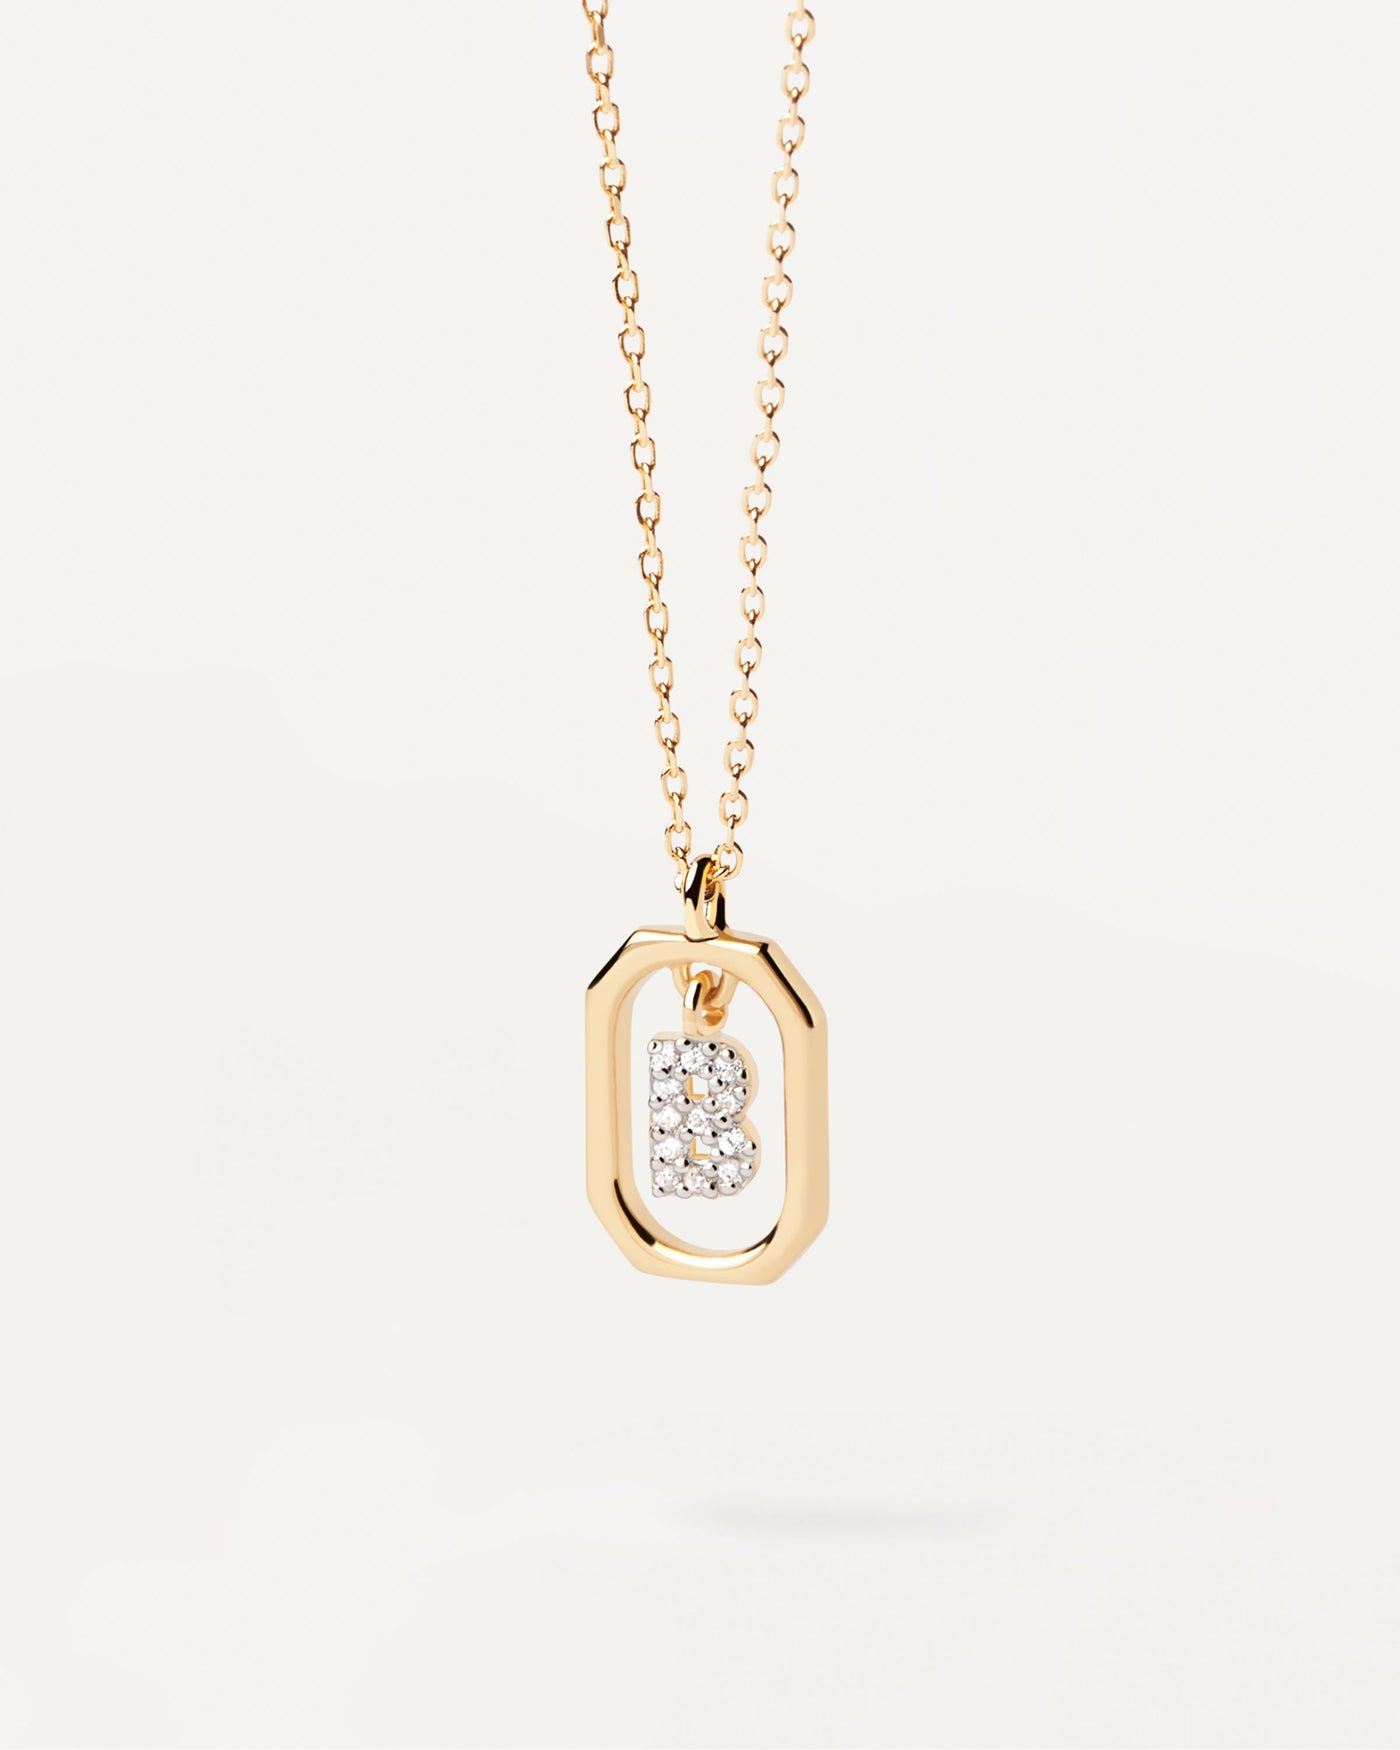 2023 Selection | Mini Letter B Necklace. Small initial B necklace in zirconia inside gold-plated silver octagonal pendant. Get the latest arrival from PDPAOLA. Place your order safely and get this Best Seller. Free Shipping.